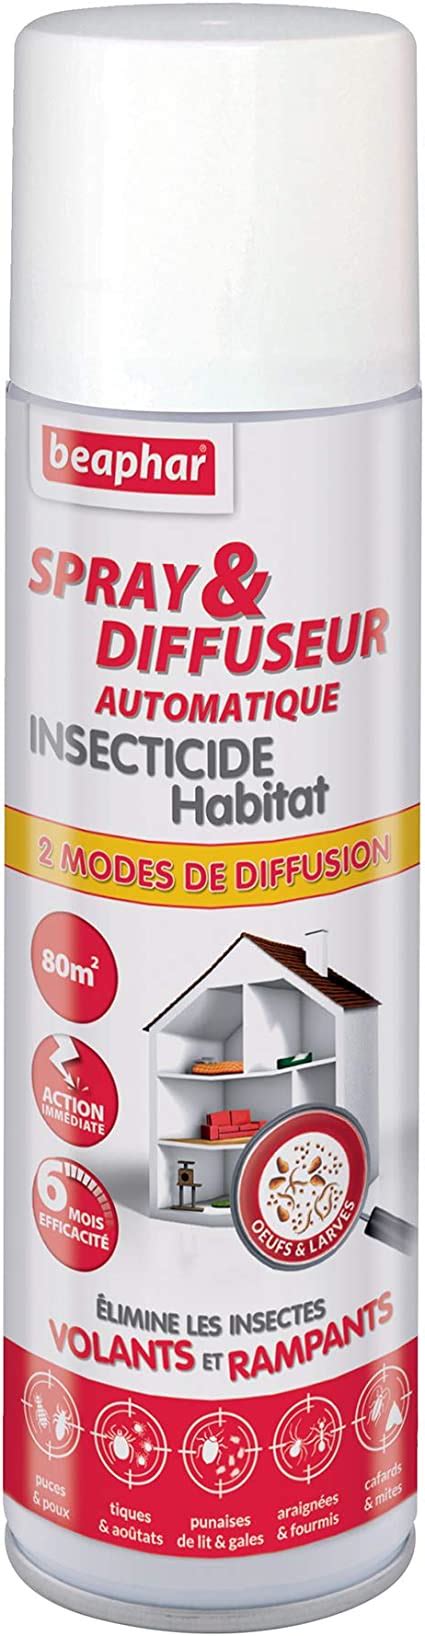 Beaphar Spray And Diffuseur Automatique Insecticide Habitat Tue Les